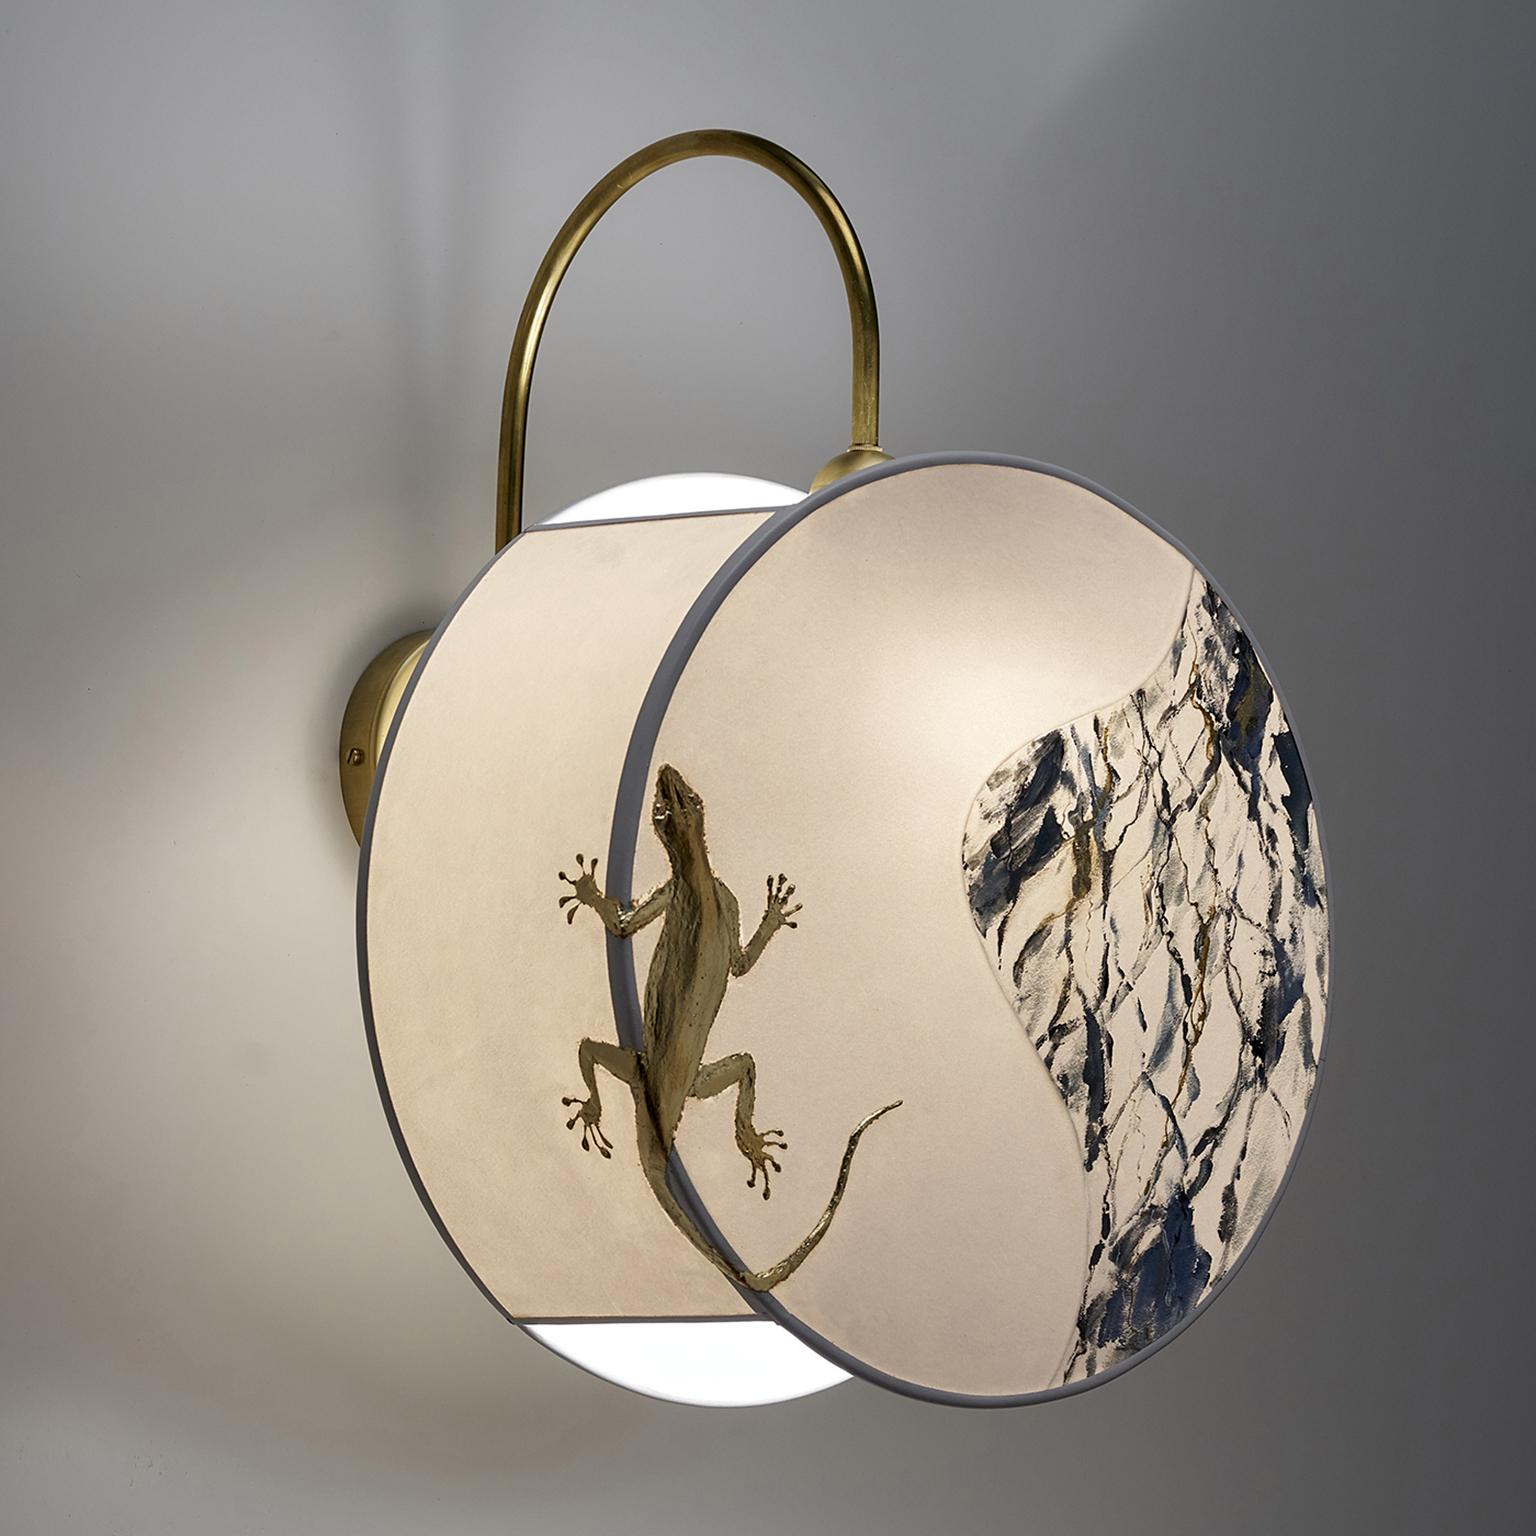 Lizard Pattern Sconce Lamps Handmade Velvet and Brass In New Condition For Sale In Campolongo Maggiore, IT